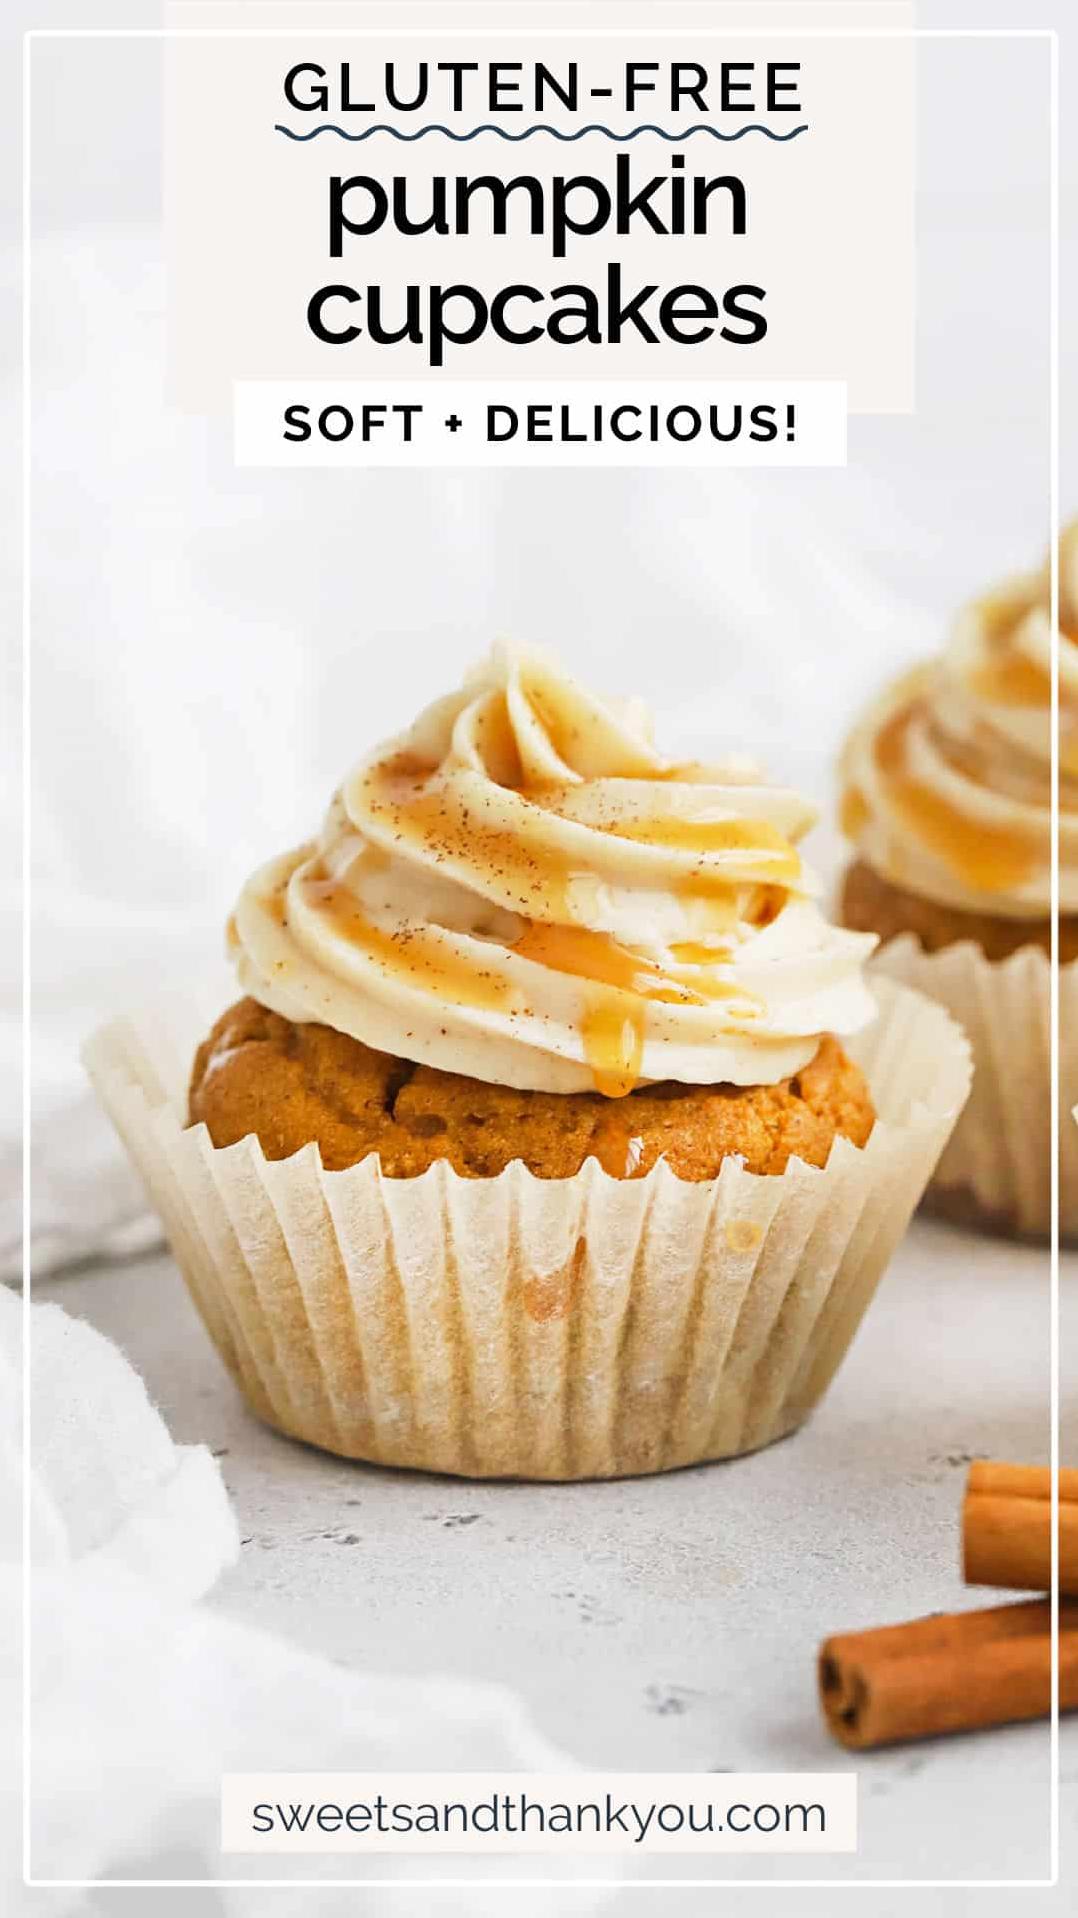  These cupcakes are the perfect autumn treat for everyone, gluten-free or not